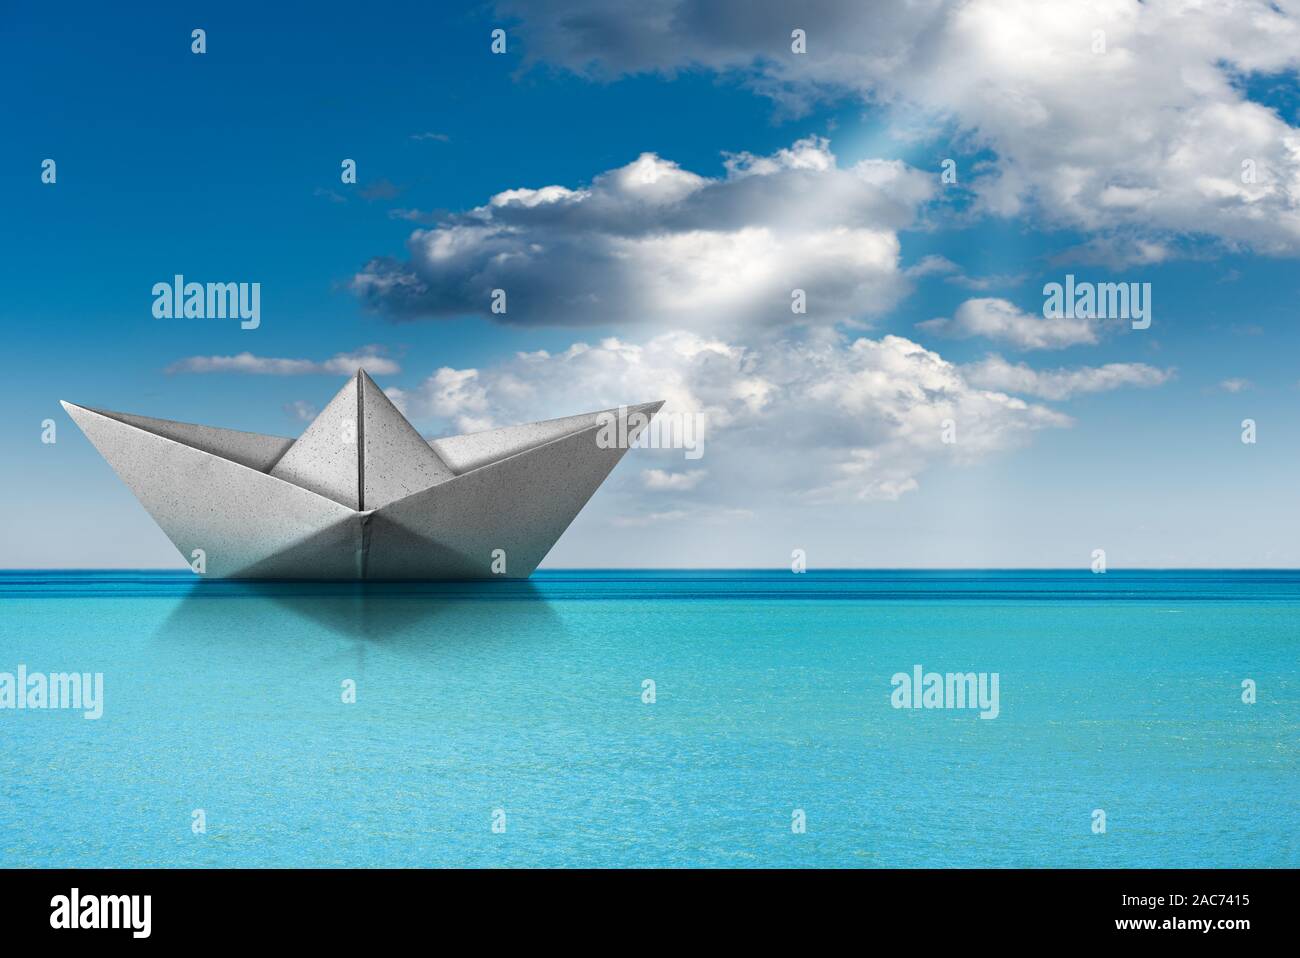 White paper boat, origami, in the turquoise sea with blue sky, clouds and sun rays Stock Photo